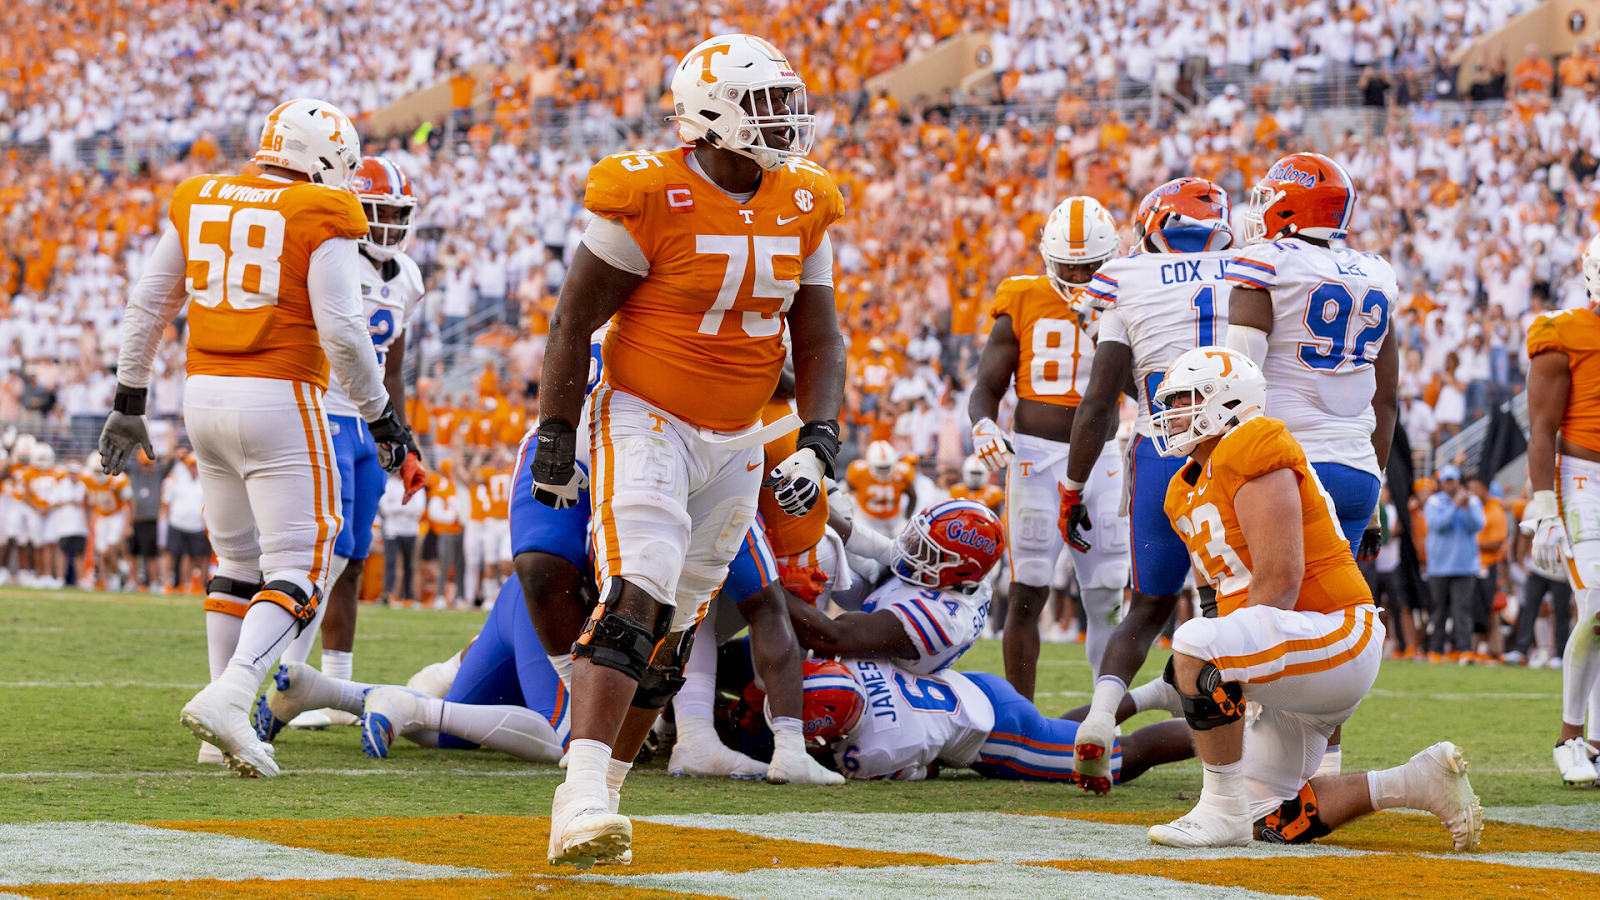 Jerome Carvin showcases great power and instincts on the Tennessee offensive line. Hula Bowl scout Joel Titus breaks down the strengths and weaknesses of Carvin as an NFL Prospect in this article.